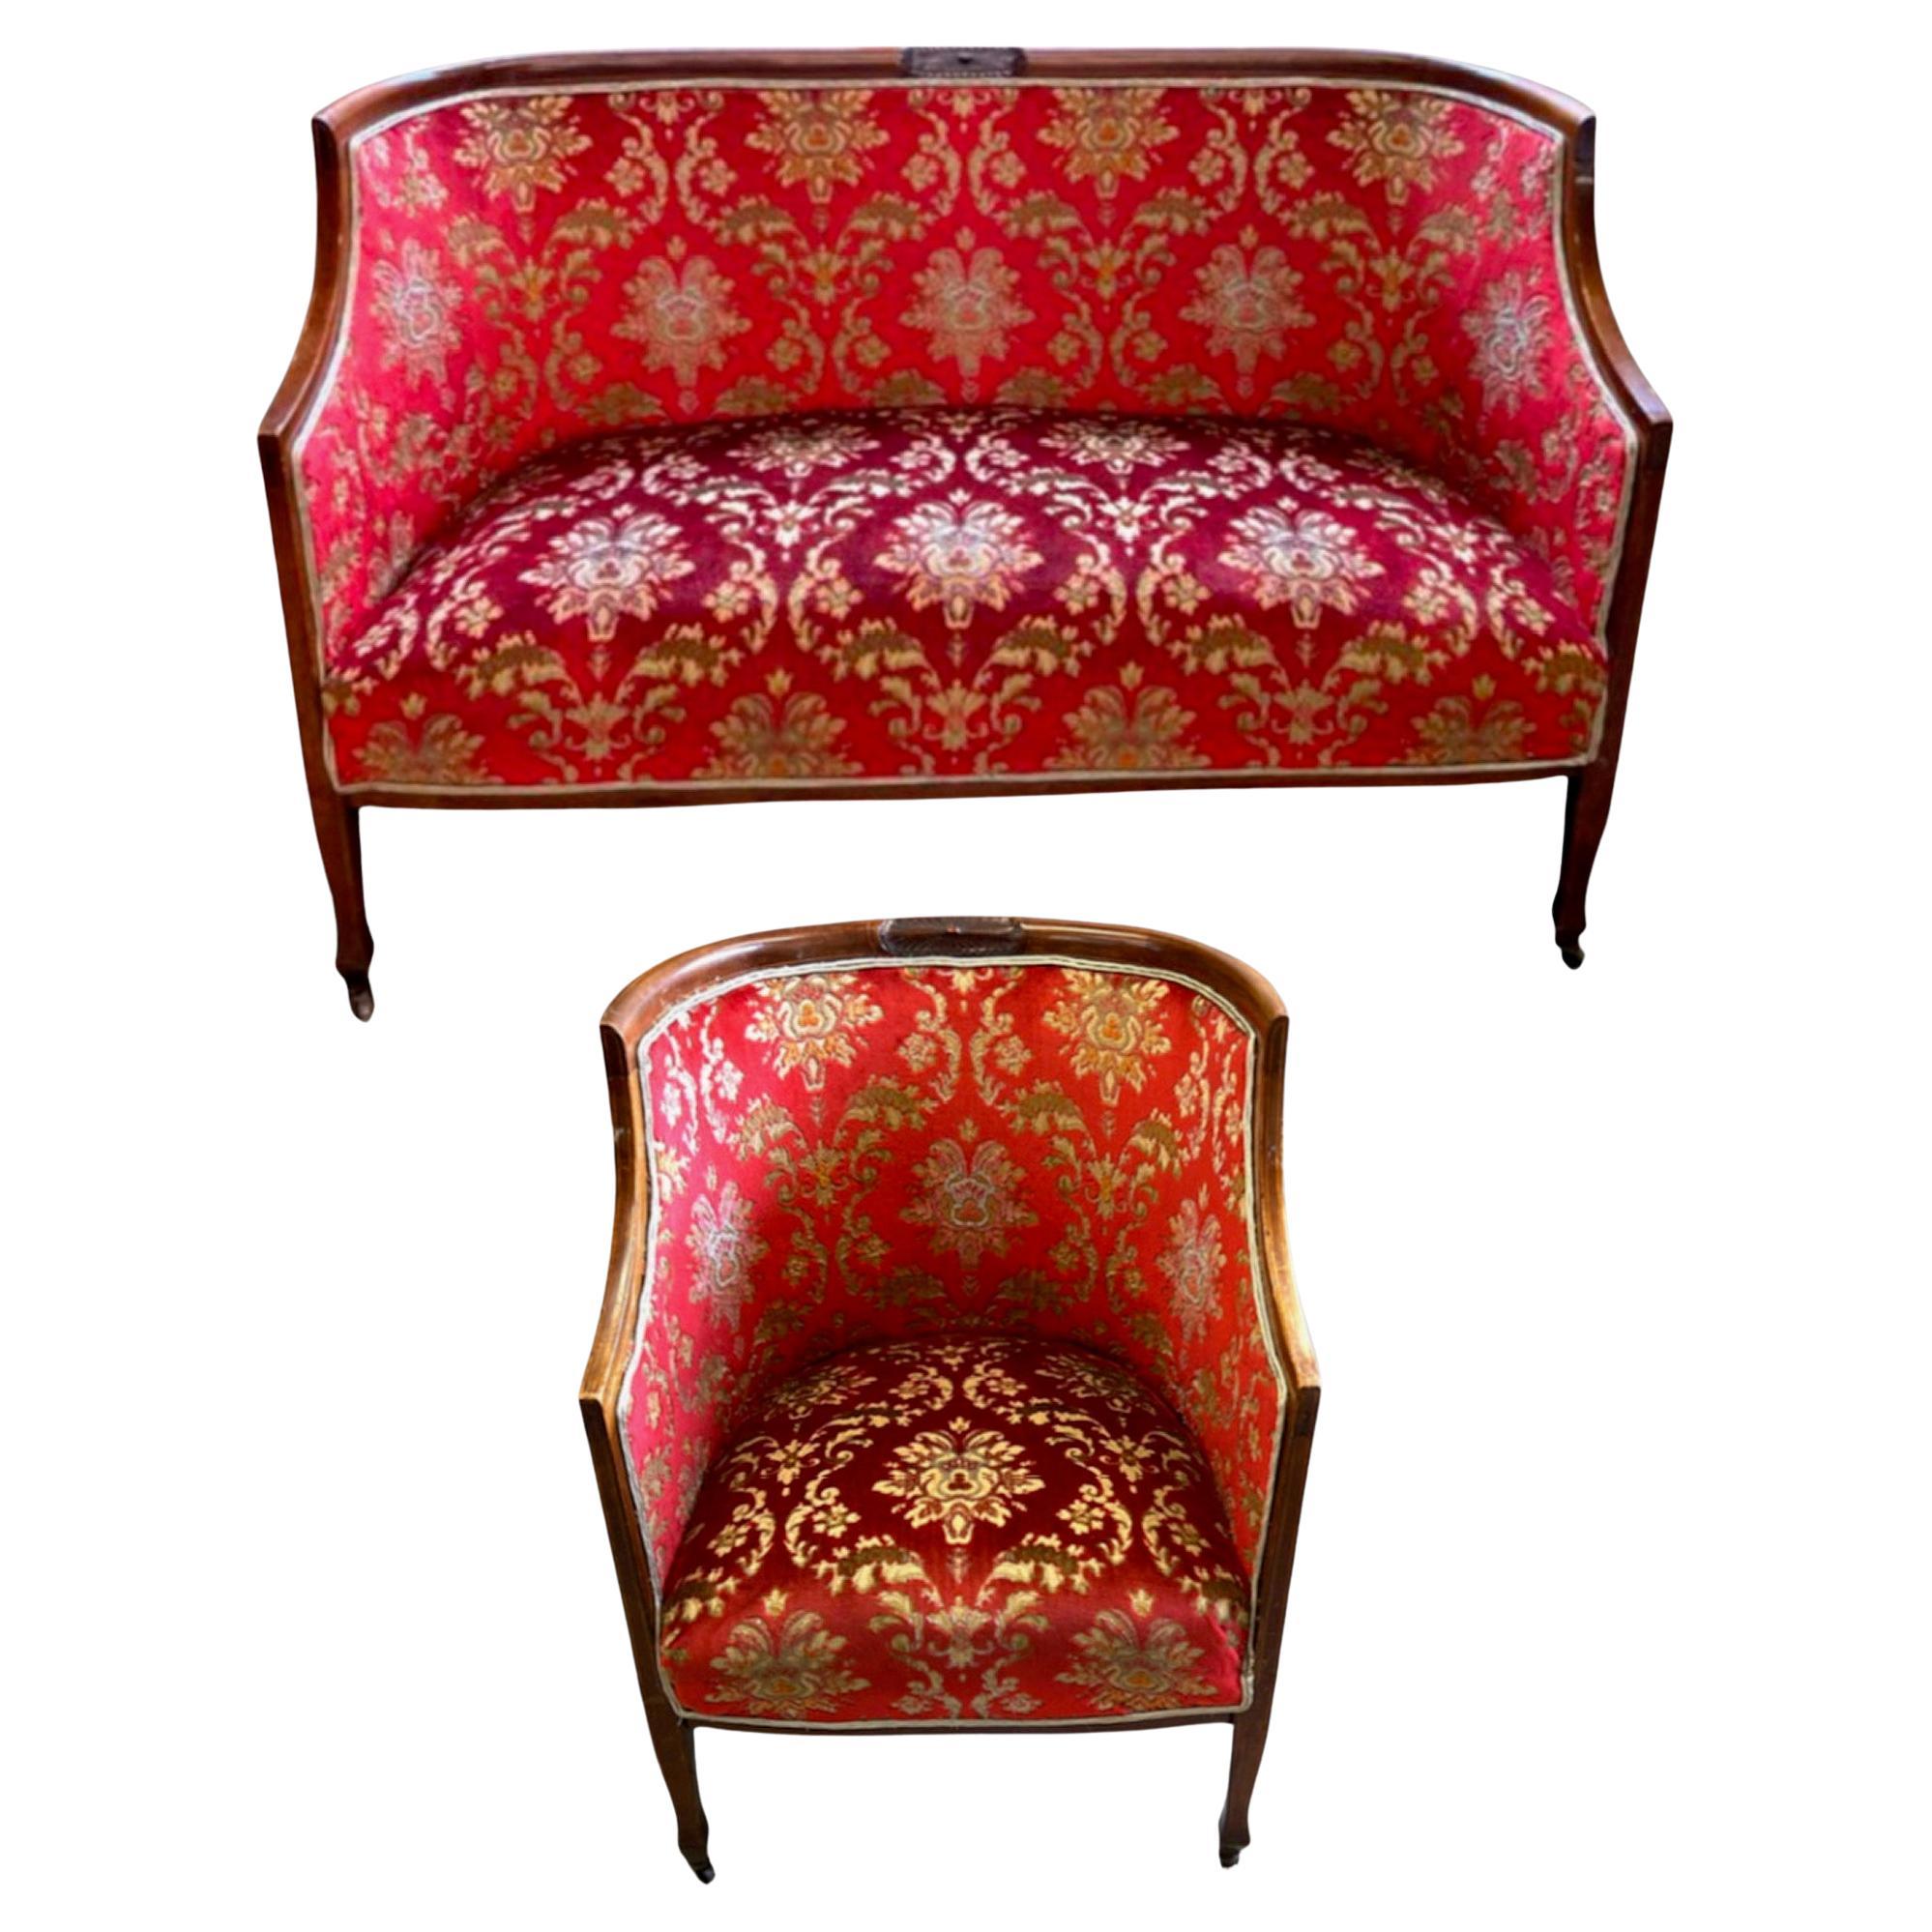 An Attractive Boudoir Edwardian Settee and Chair